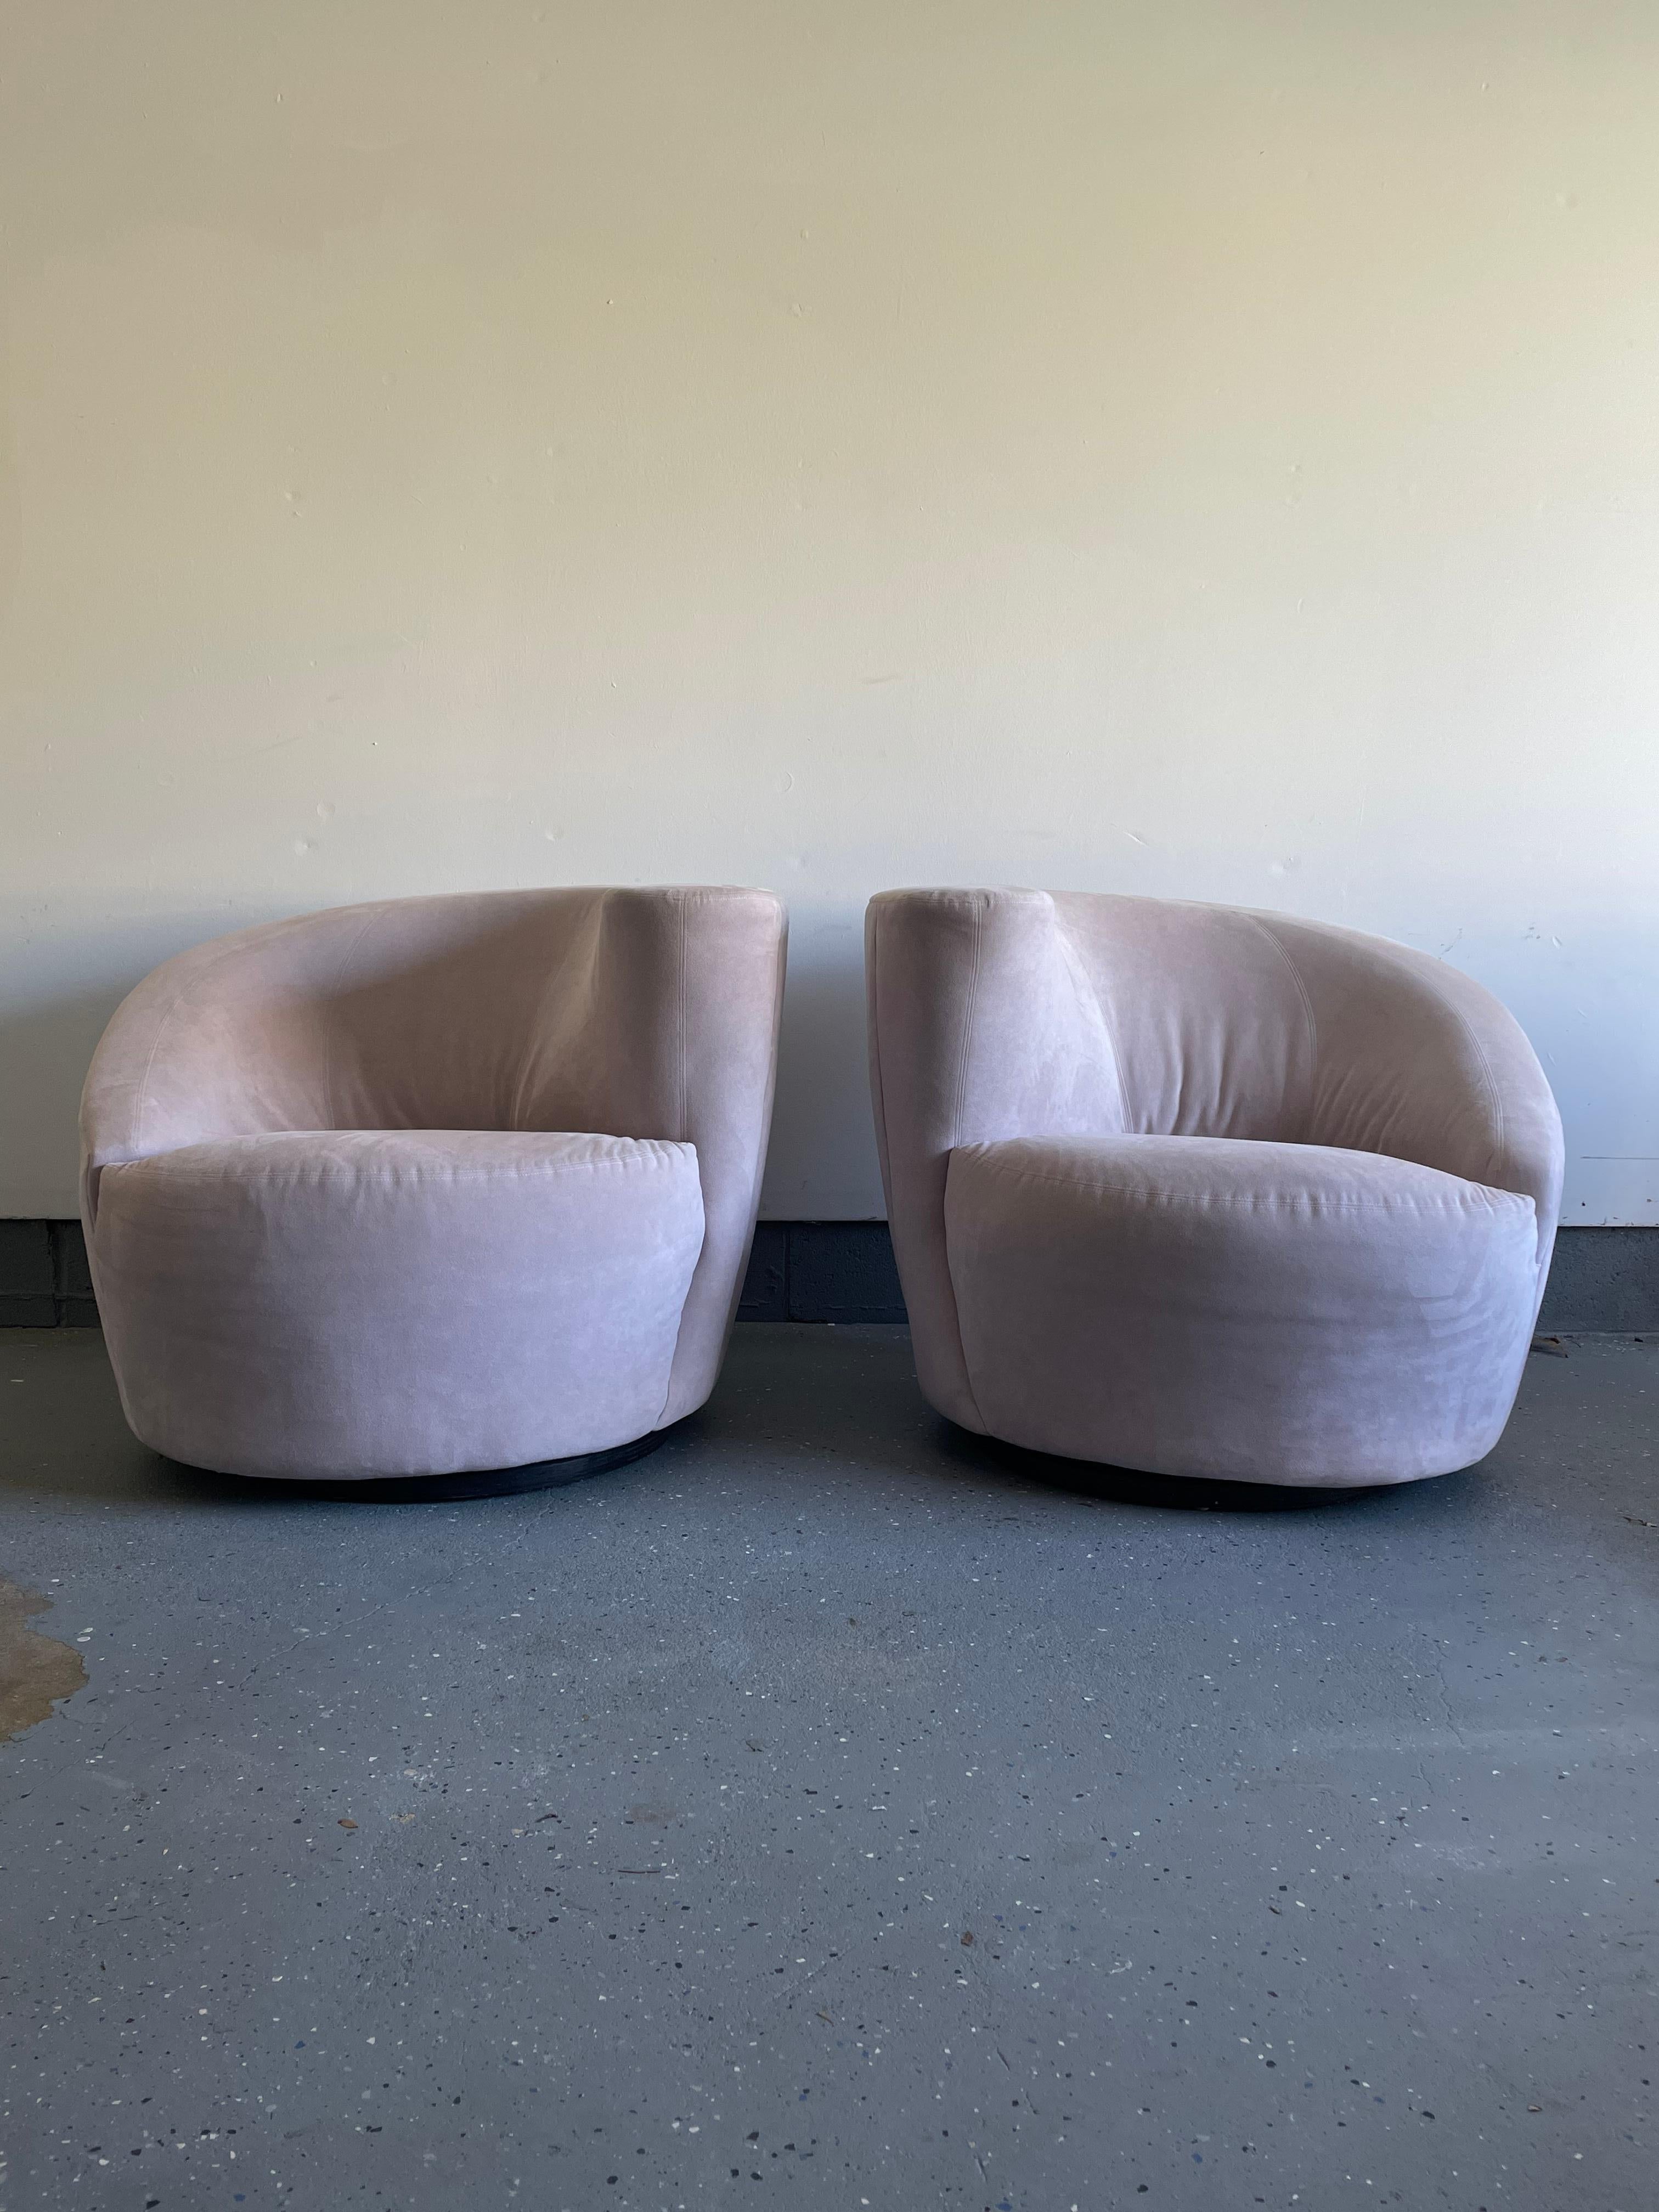 Chairs are currently upholstered in the original blush/ tan microsuede upholstery. Chairs feature an organic design of the back sloping down in a cork screw manner there by serving as the arm as well. Also regarded to as a Nautilus chair. 

Please